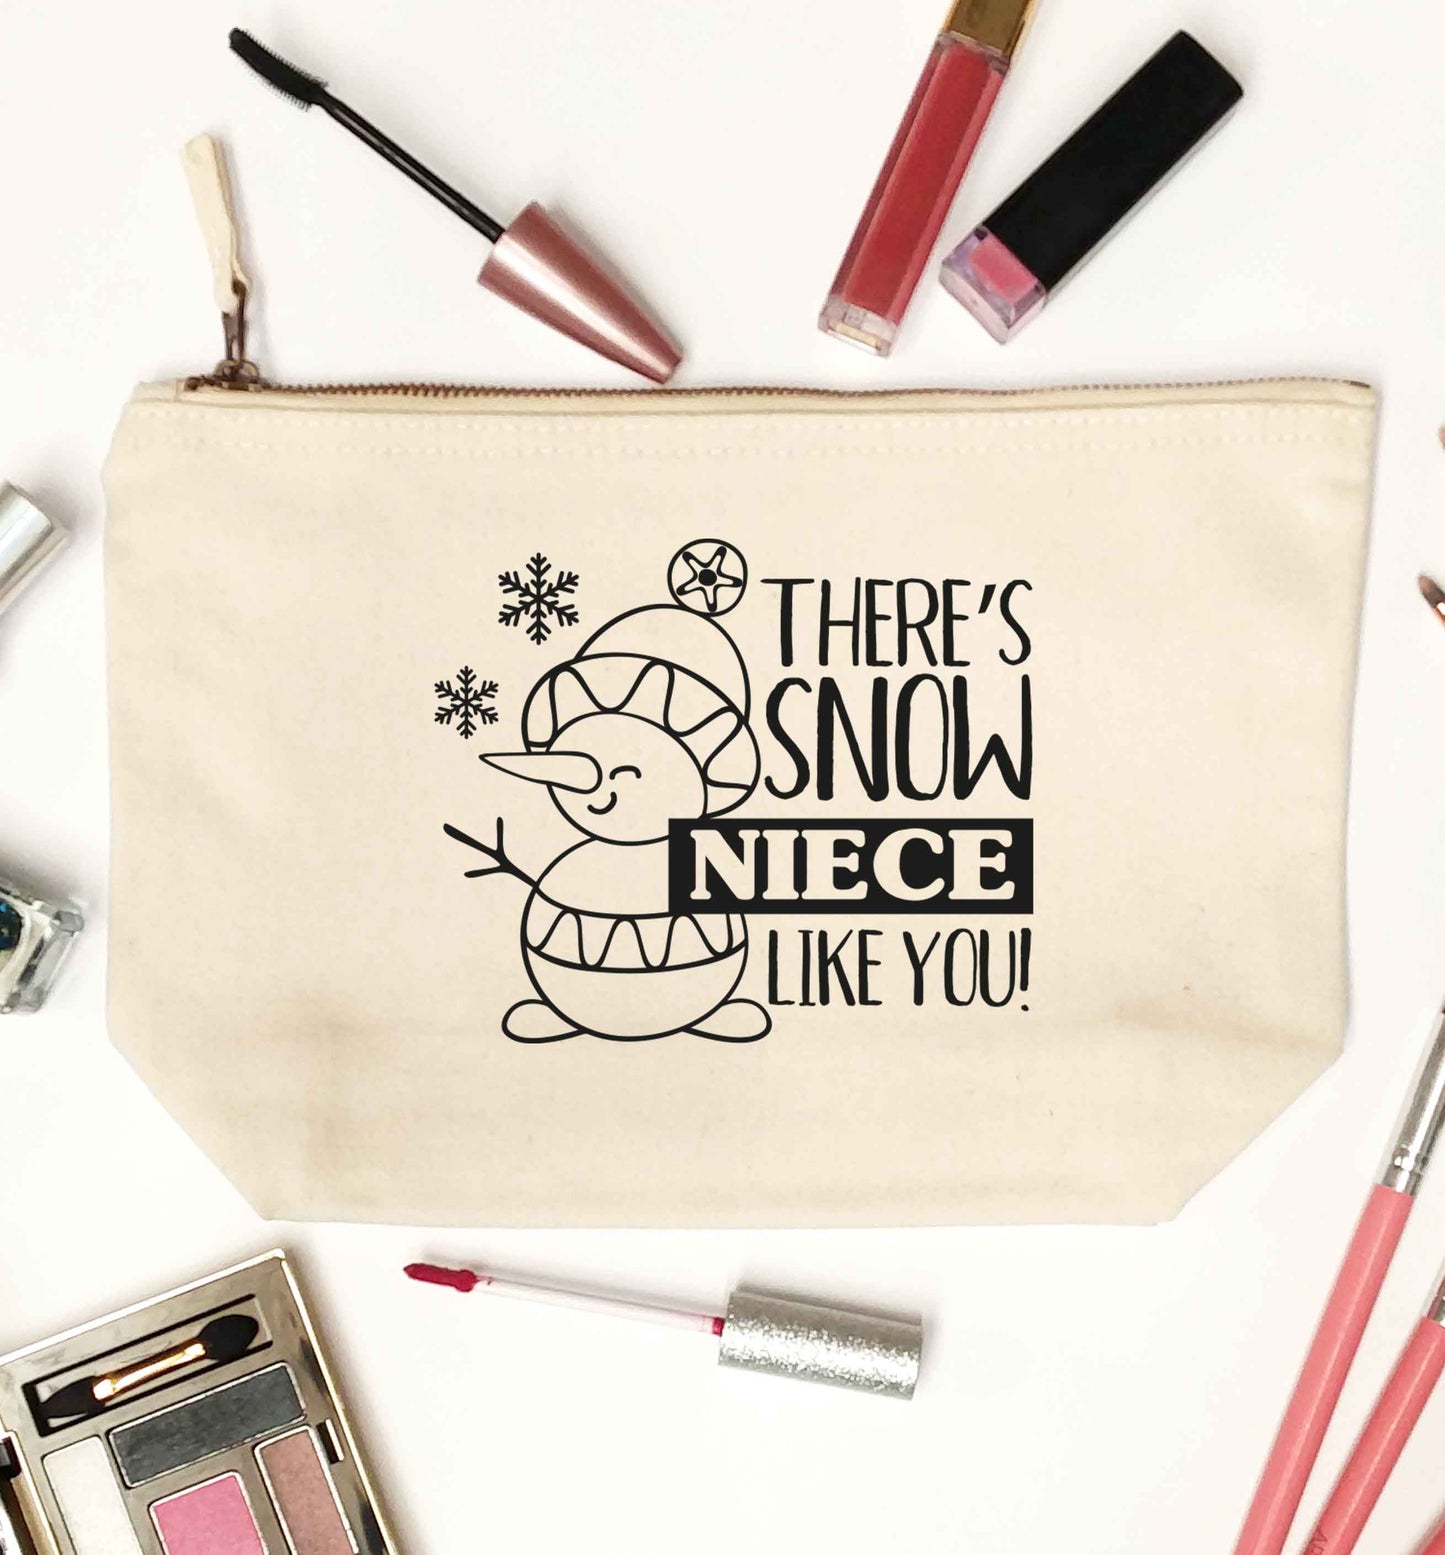 There's snow niece like you natural makeup bag